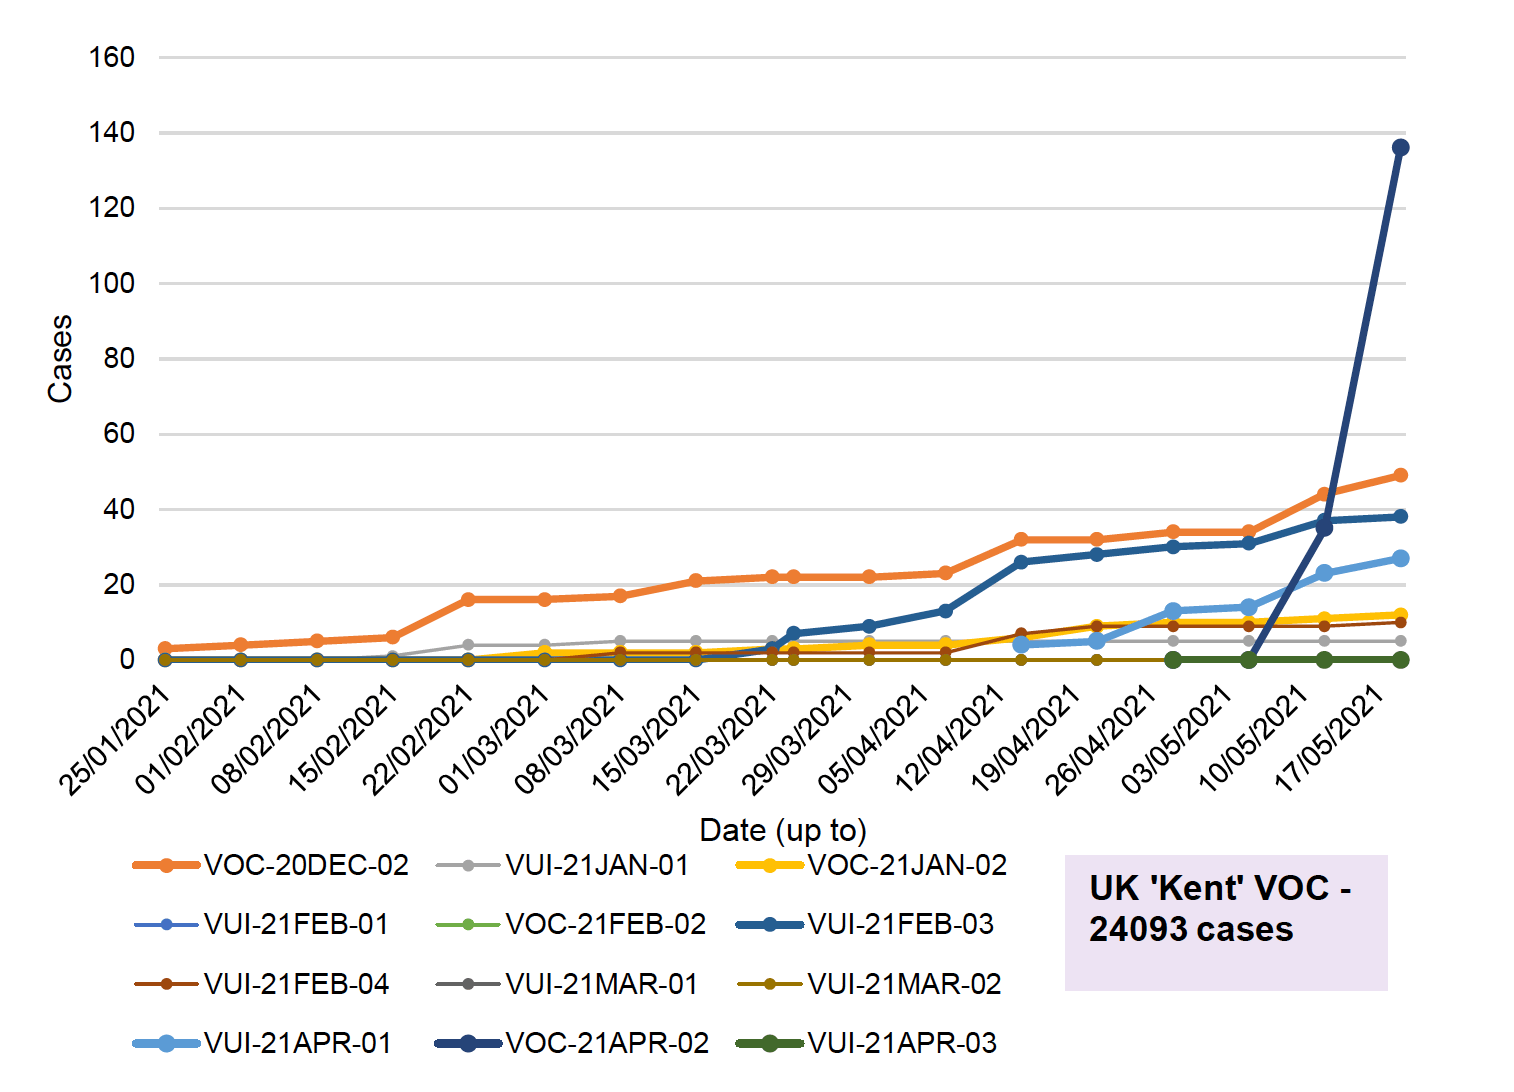 The figure shows the number of cases for the variants of concern and variants of interest detected by sequencing in Scotland during the period 25 January 2021 to 19 May 2021.
VOC-20DEC-02, first found in South Africa, has been increasing steadily since late January from 3 cases initially and is currently at 49 cases. VUI-21FEB-03, first identified in Nigeria, has seen a rapid increase since mid-March and started to slow in recent weeks, increasing to 38 genomically confirmed cases in the past week. There are also 27 cases of VUI-21APR-01, first identified in India, an increase of 4 since last week. VOC-21APR-02 has seen a rapid increase in the past two weeks to 136 cases, an increase of 101 since last week.
